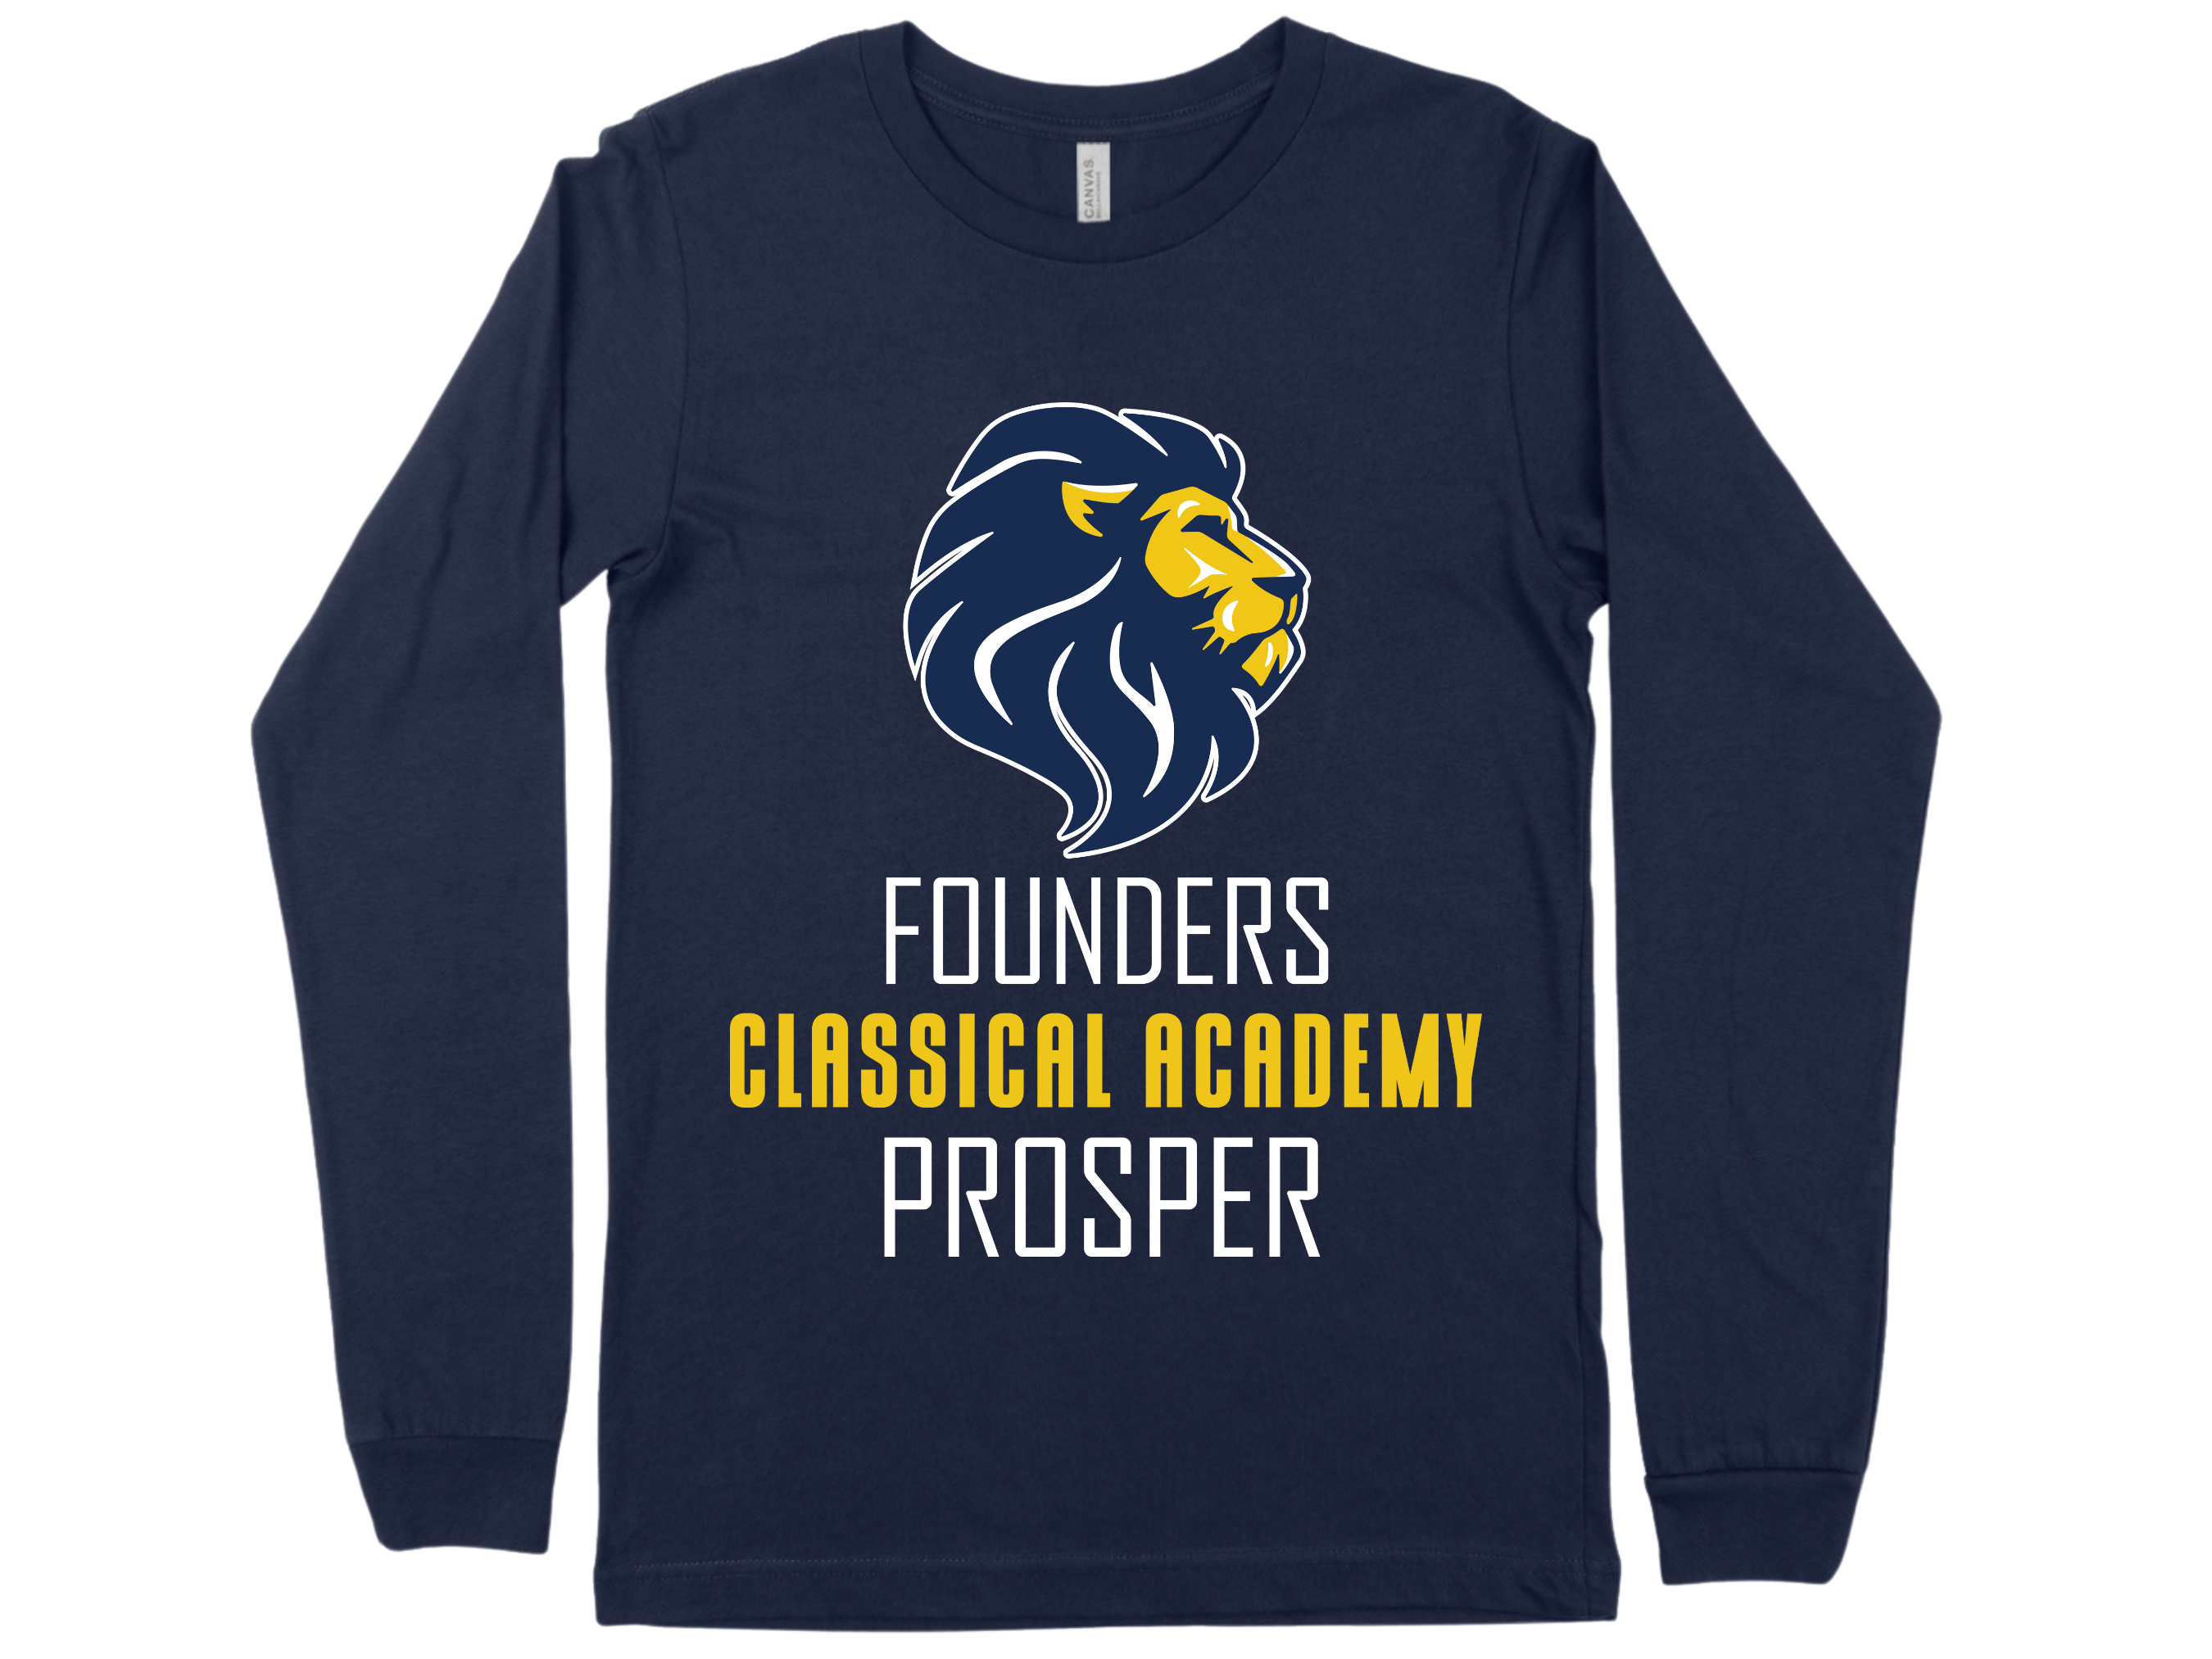 Founders Classical Academy Prosper- Navy Long Sleeve  Large Image